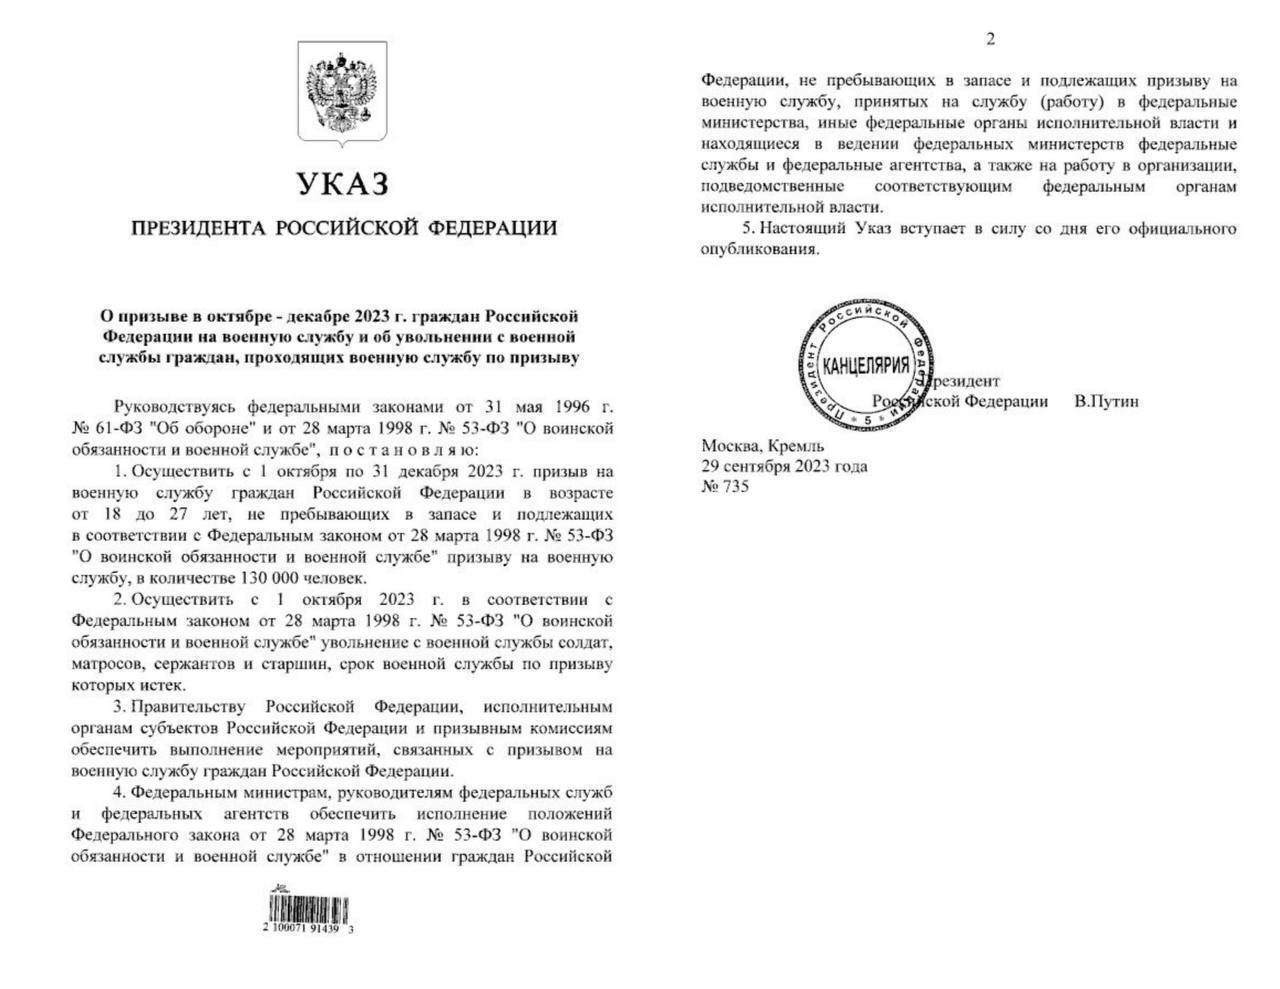 Putin signs decree on the start of the autumn conscription to the Russian army: how much ''meat'' they want to recruit